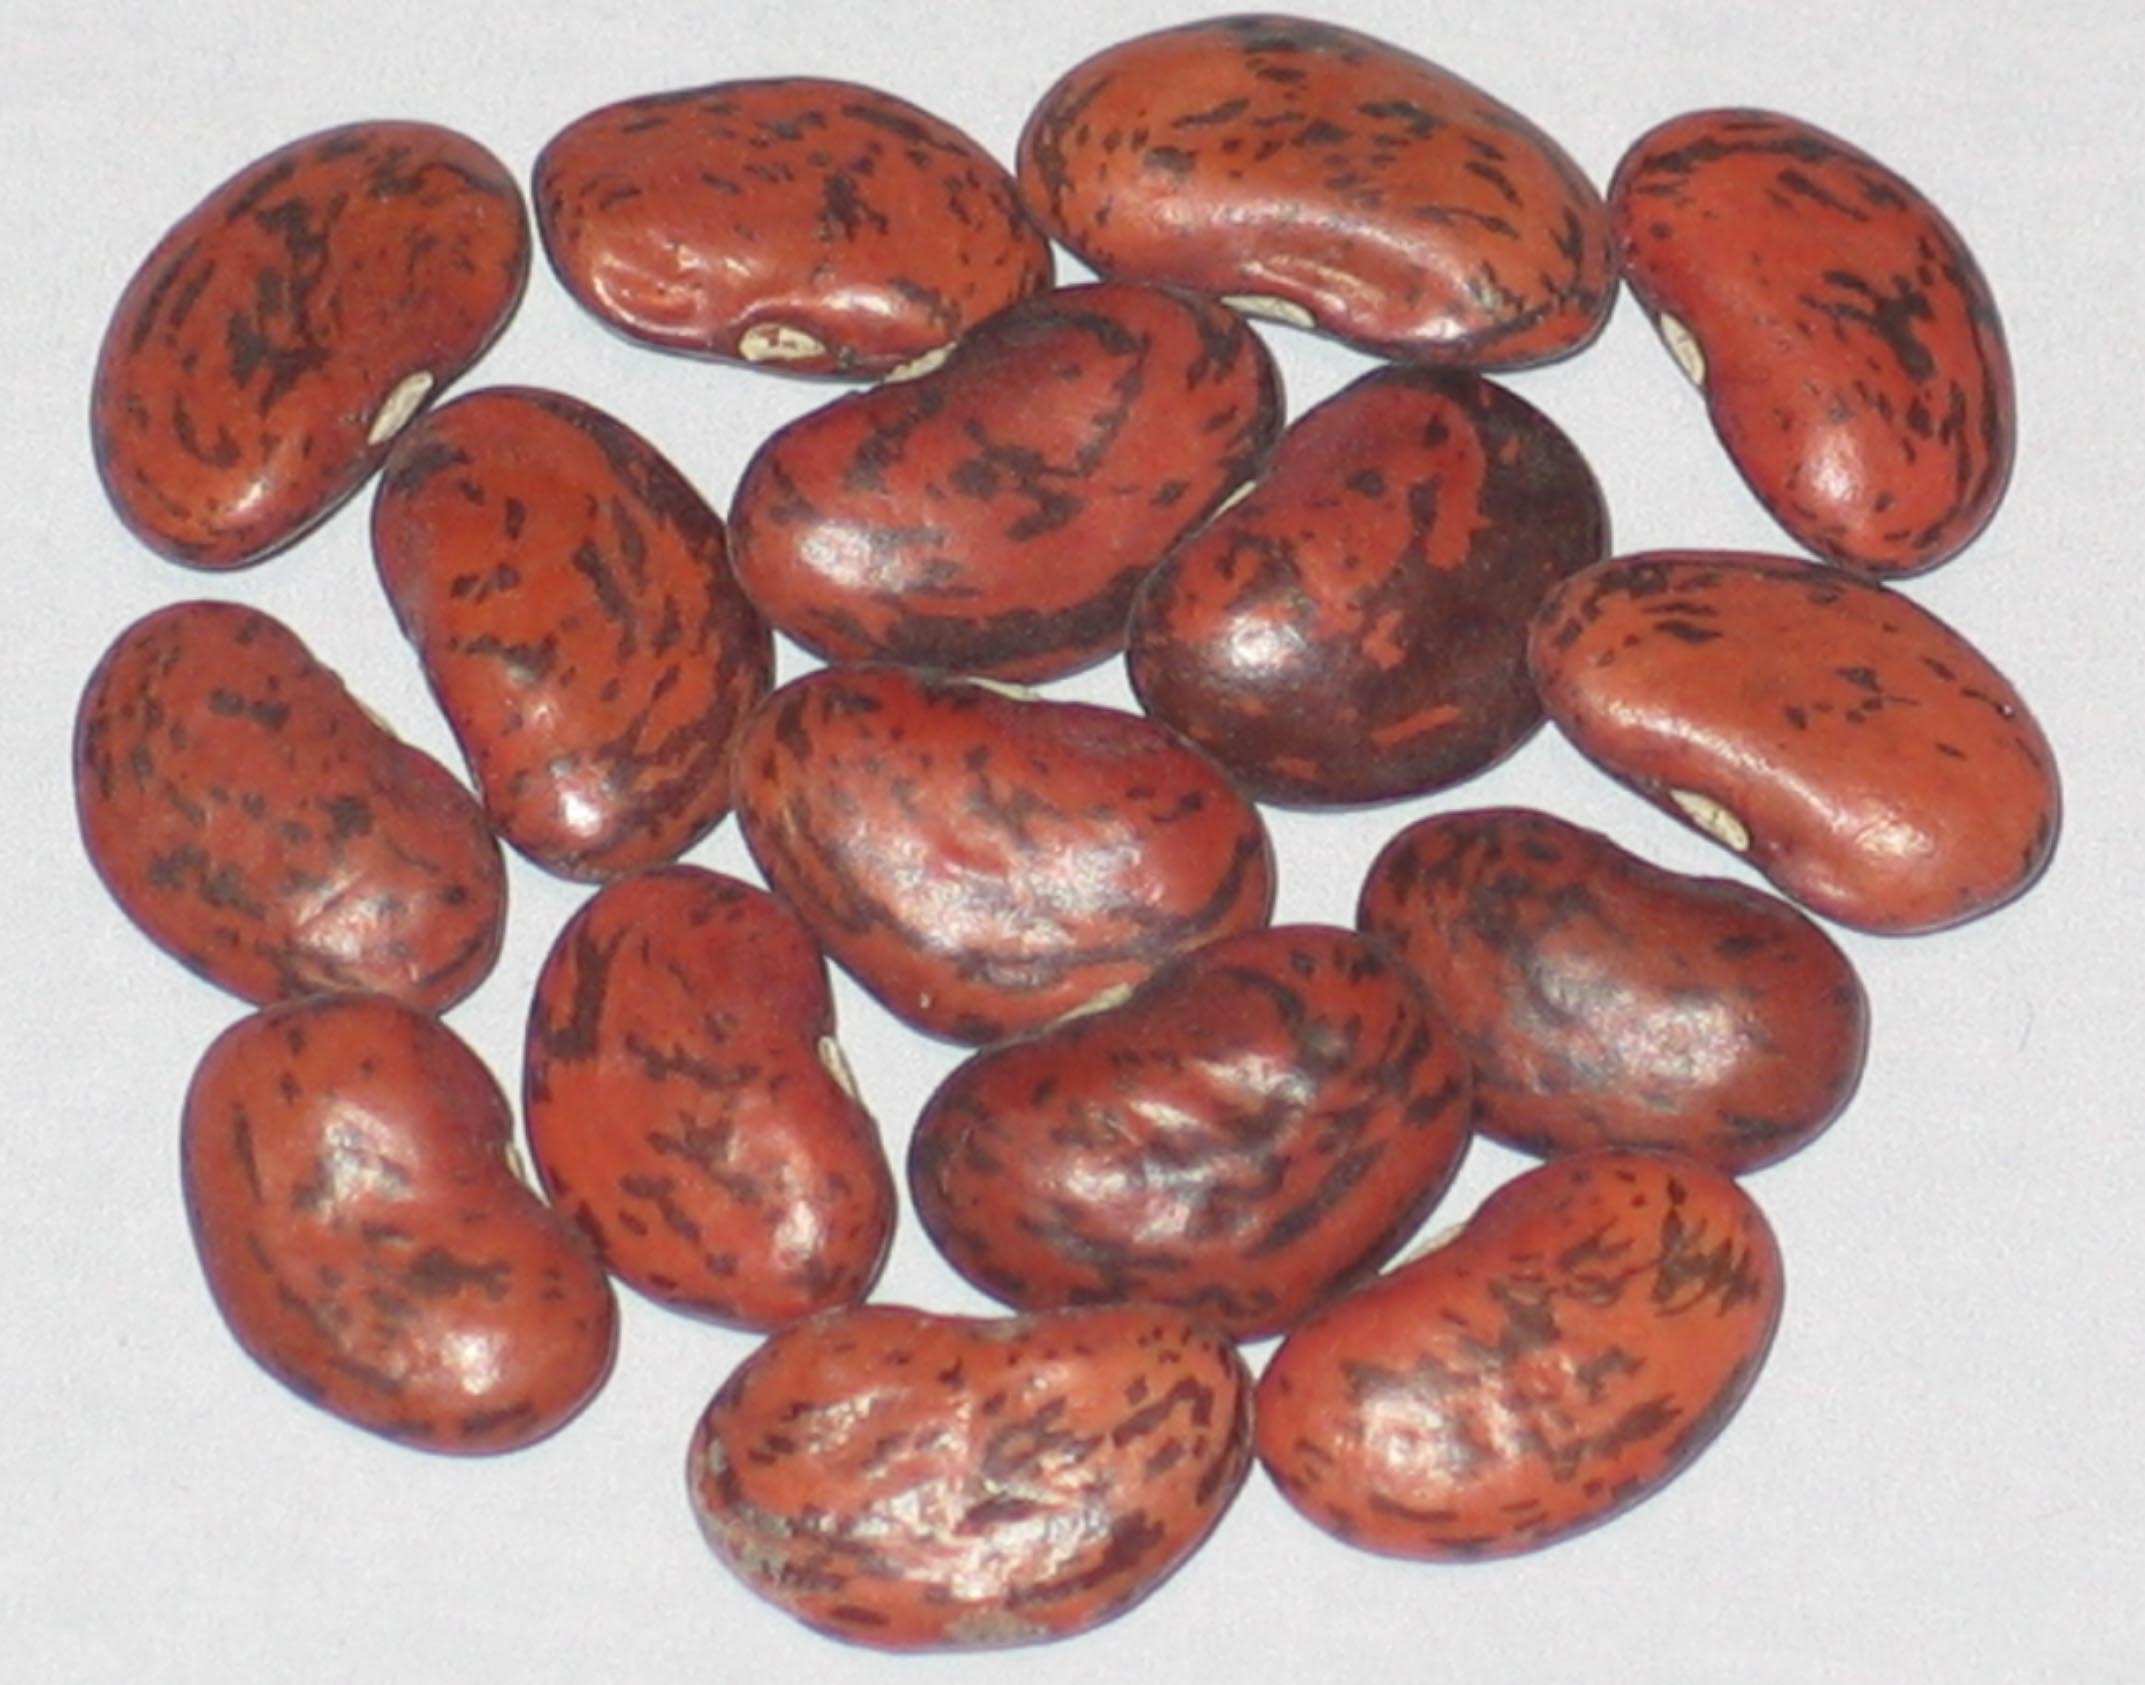 image of Old U.S. Pinto beans